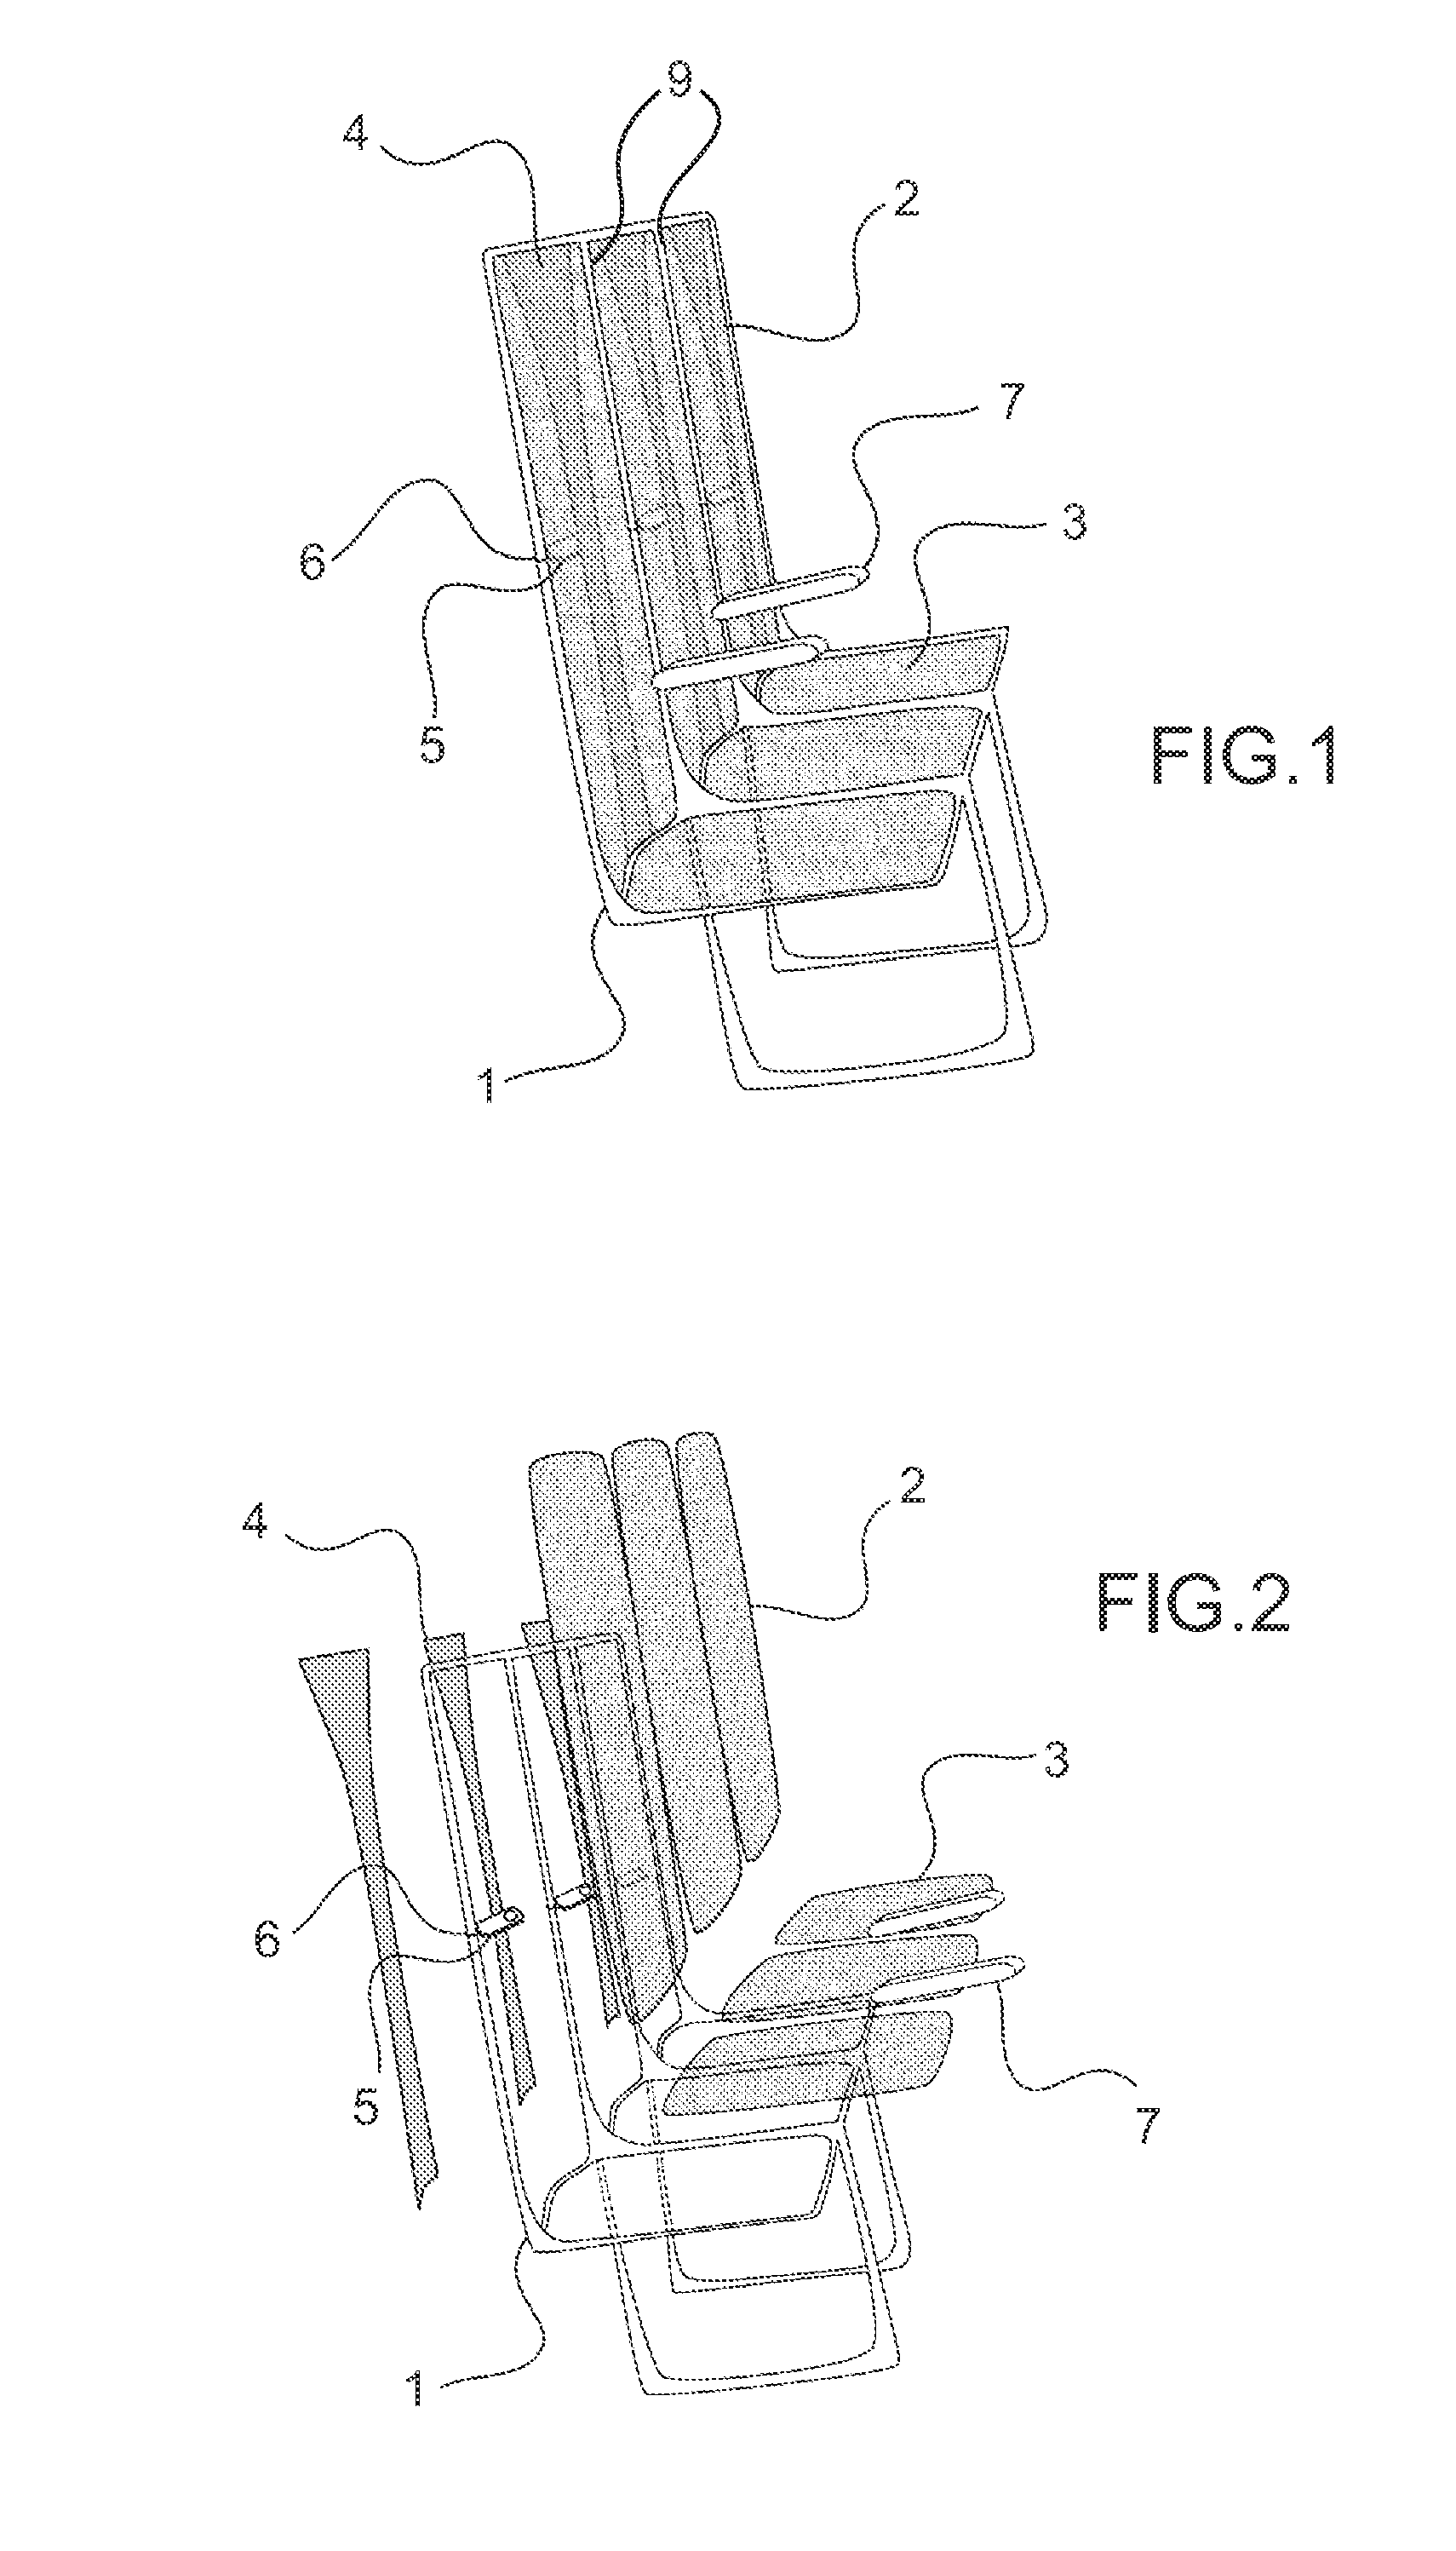 Airplane Seat Provided with a Reinforcing Strip for Absorbing Impacts